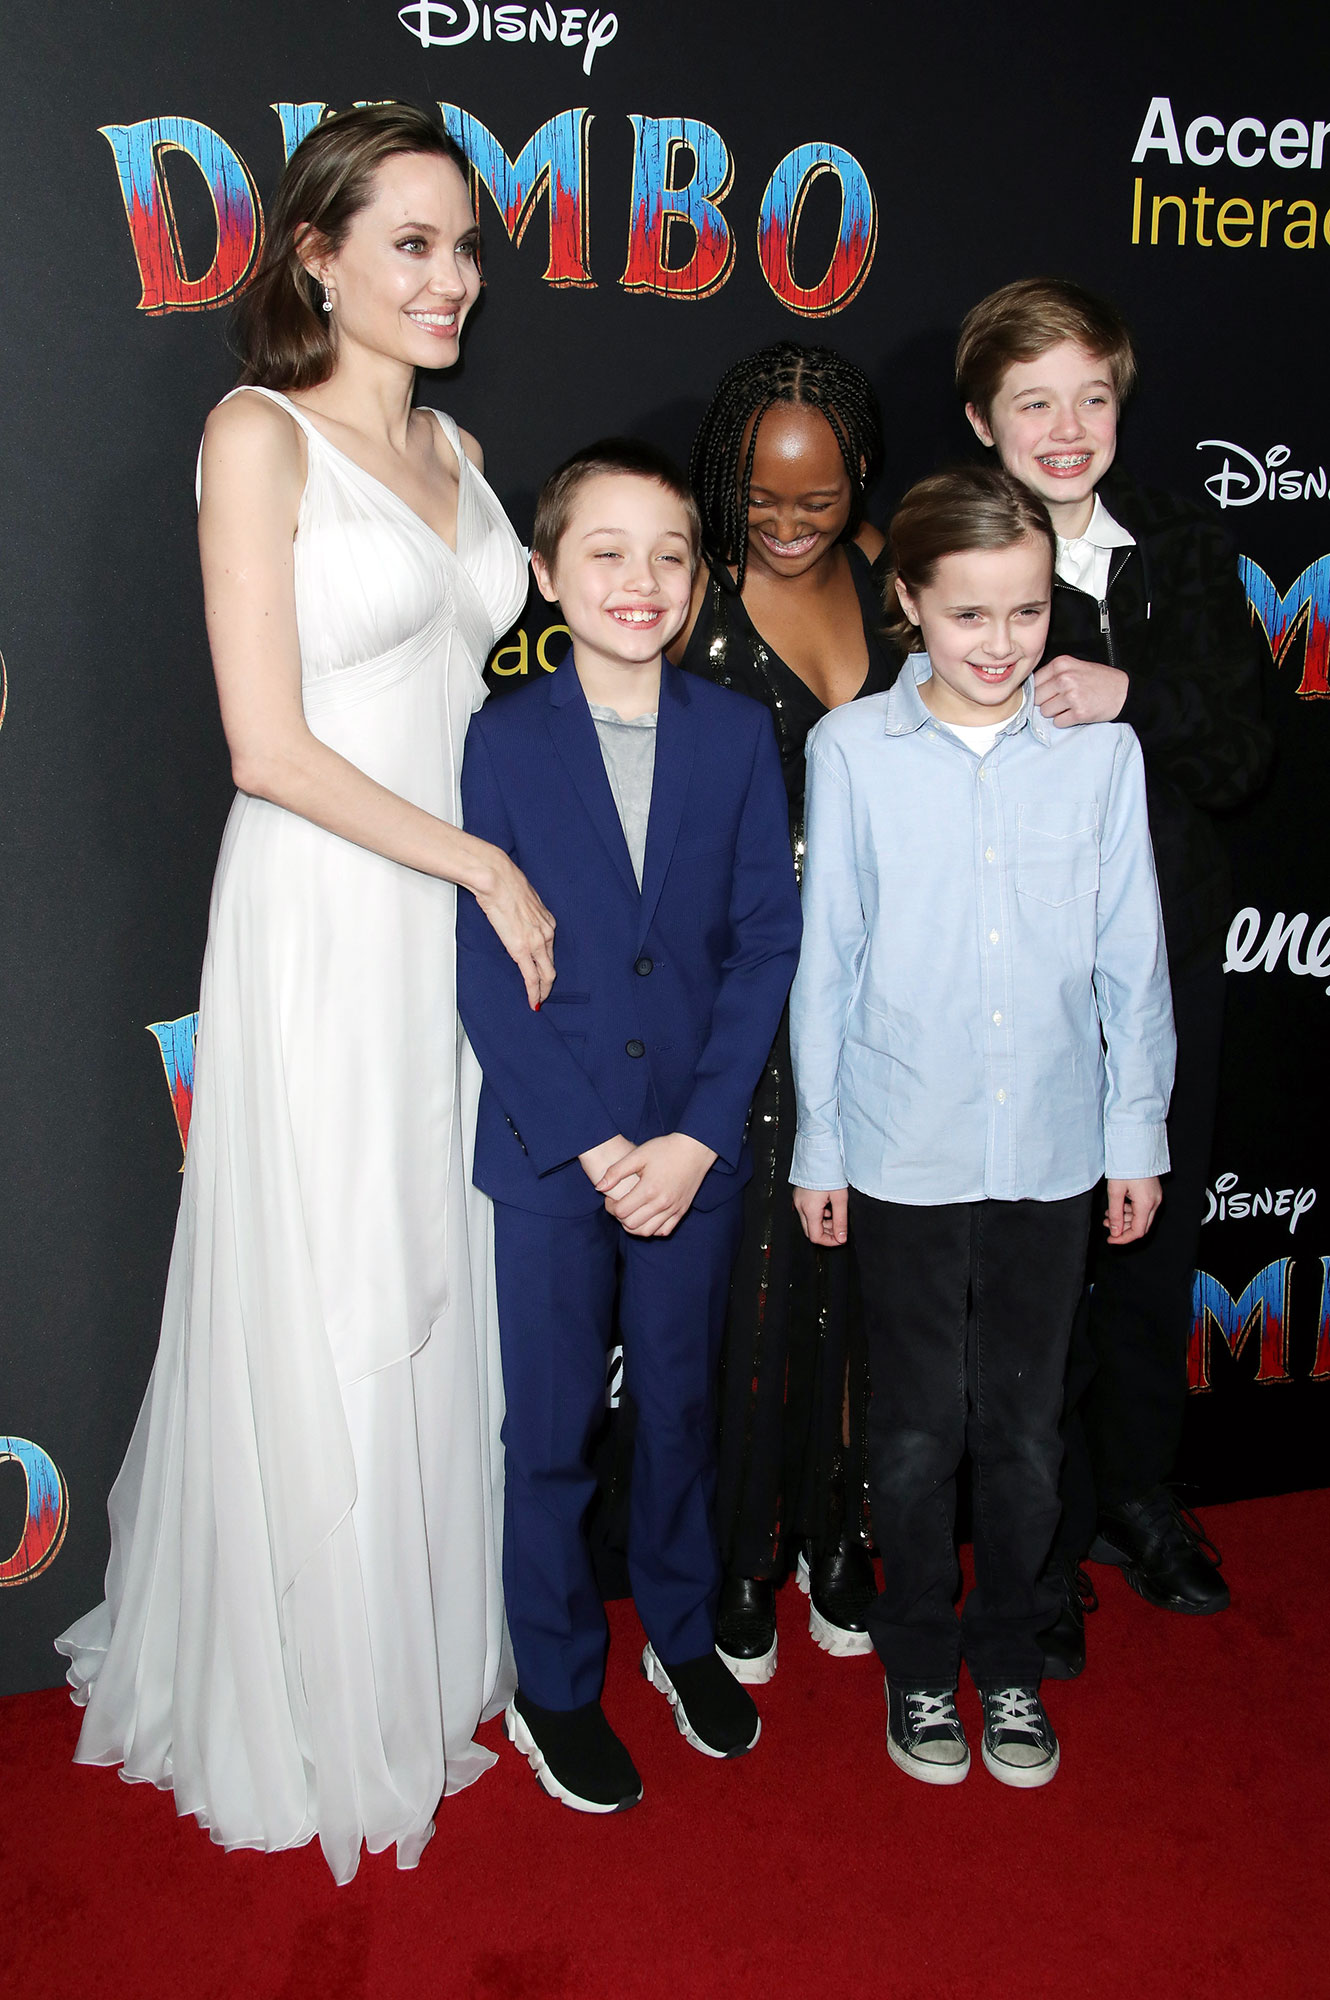 Shiloh Jolie-Pitt’s Red Carpet Style Through the Years From Traditional Tuxedos to Dior Dresses